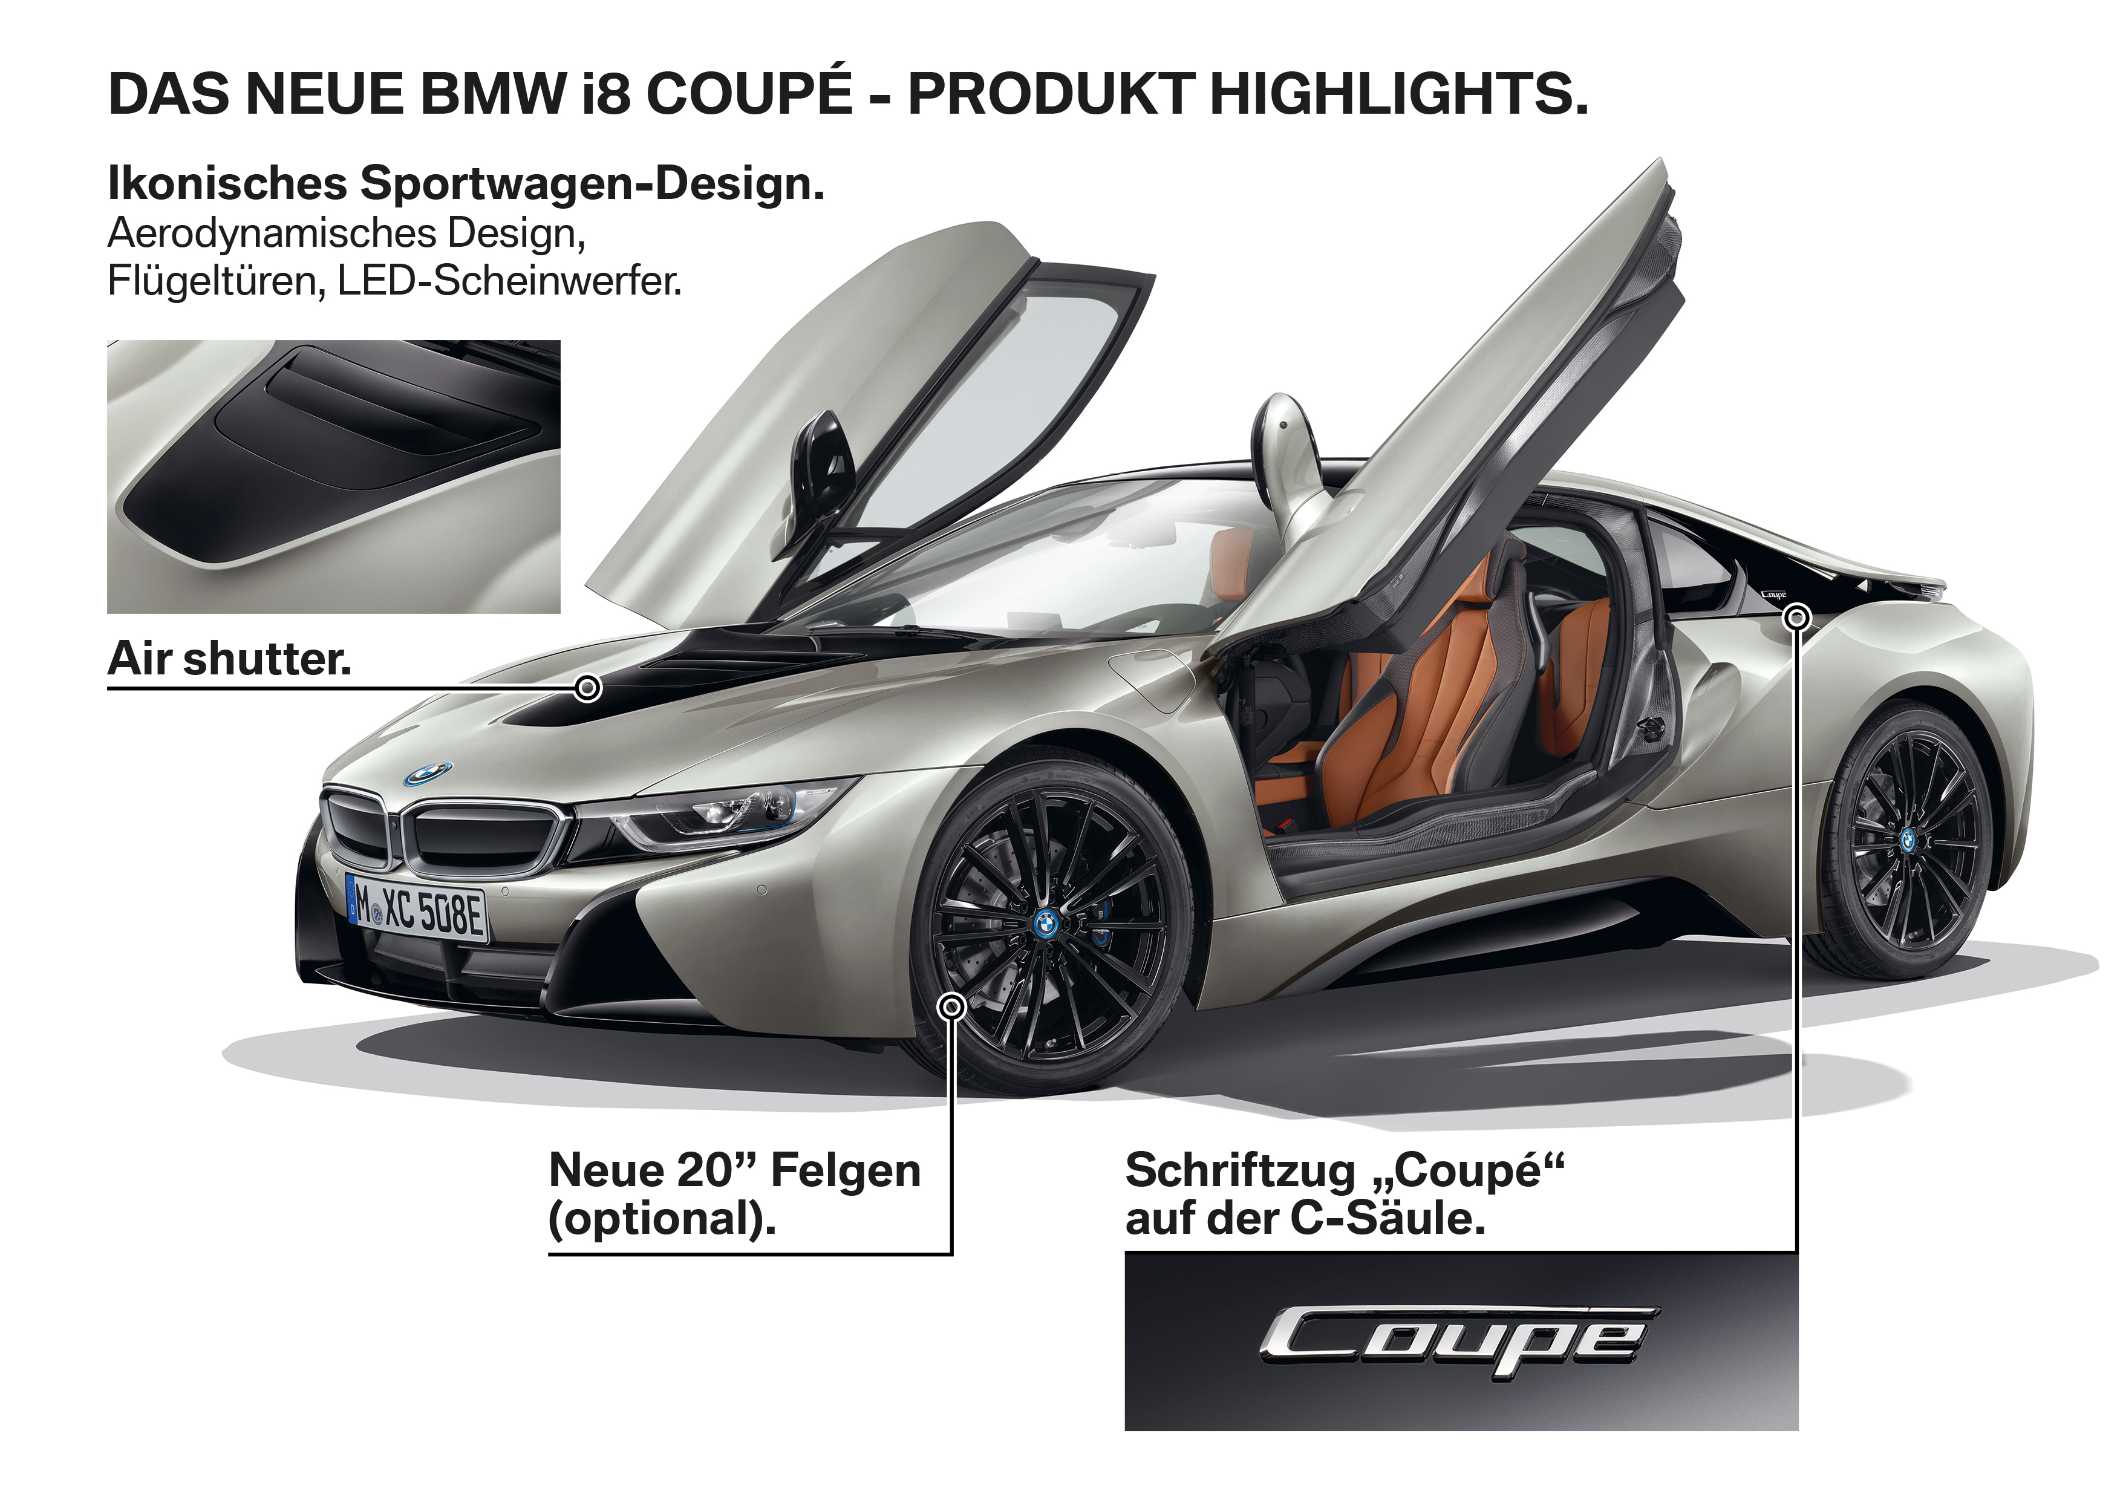 The New Bmw I8 Coupe Product Highlights 11 17